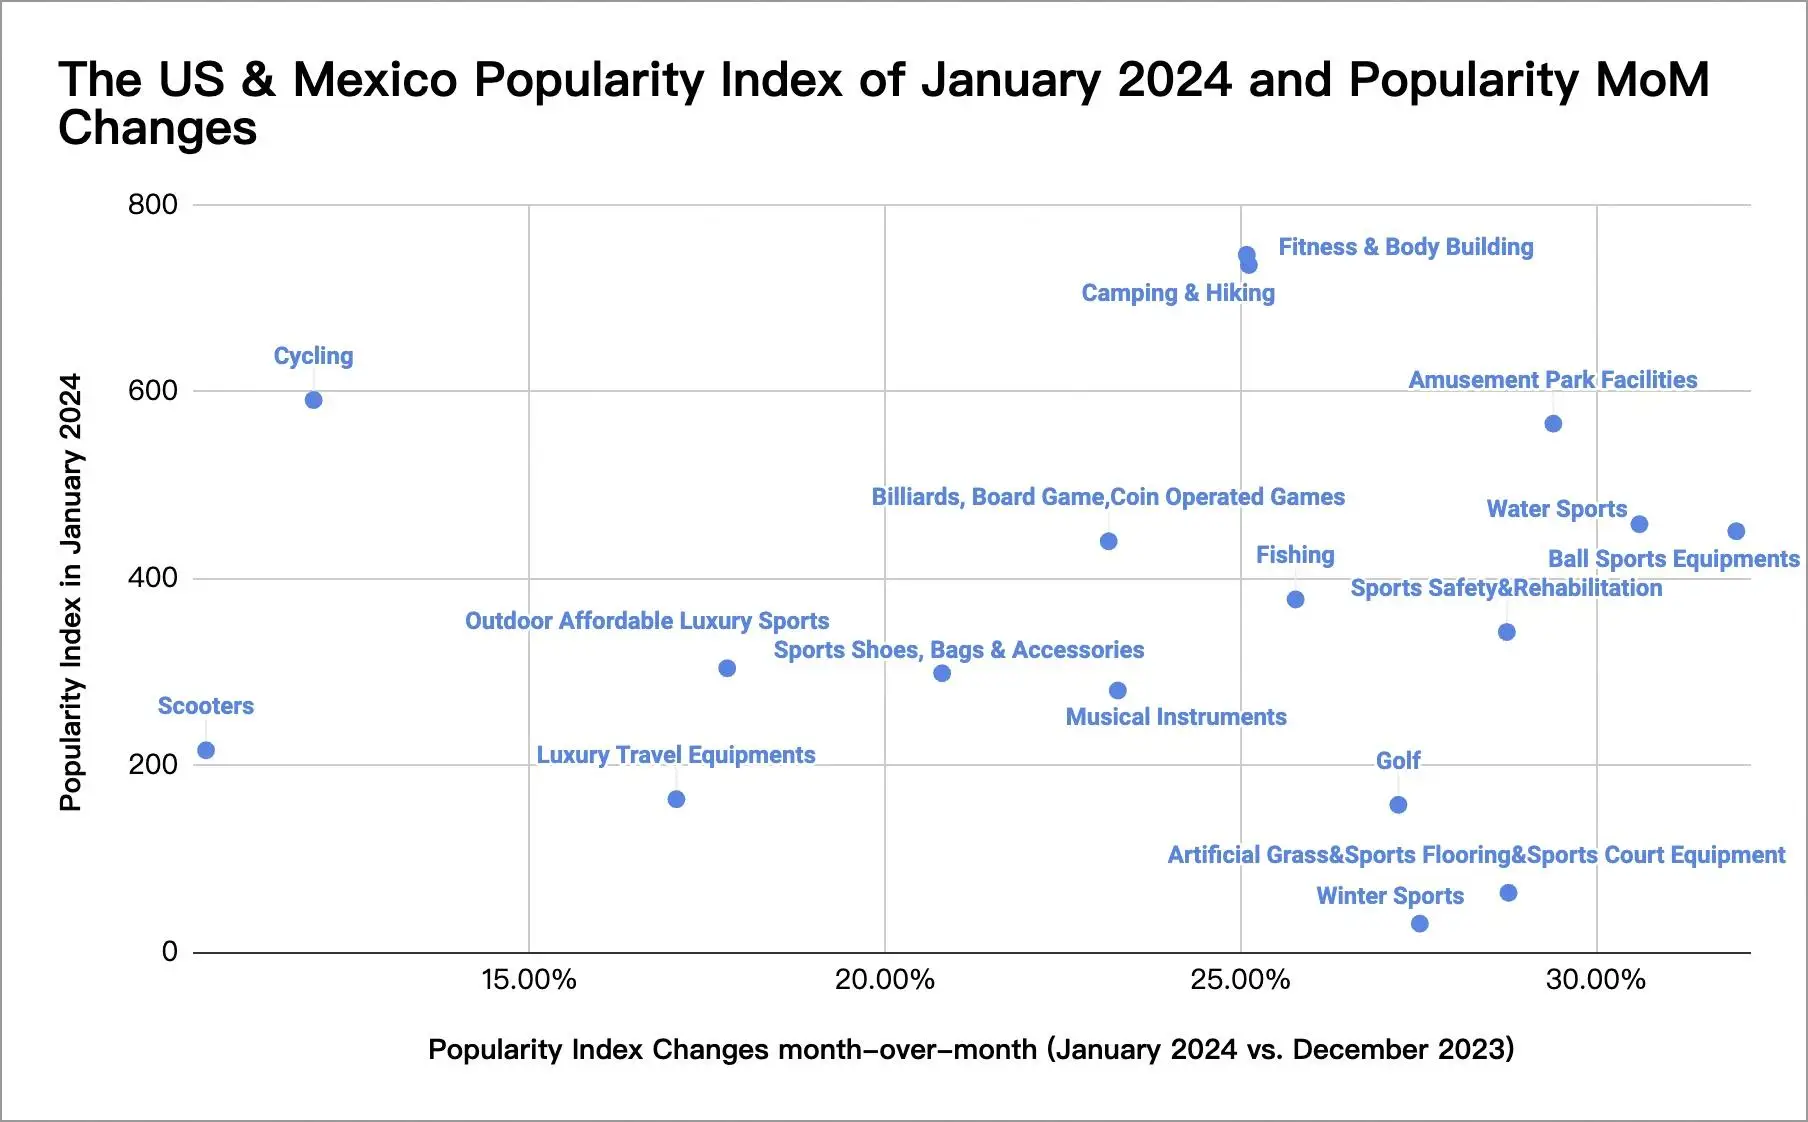 The US & Mexico Popularity Index of January 2024 and Popularity MoM Changes